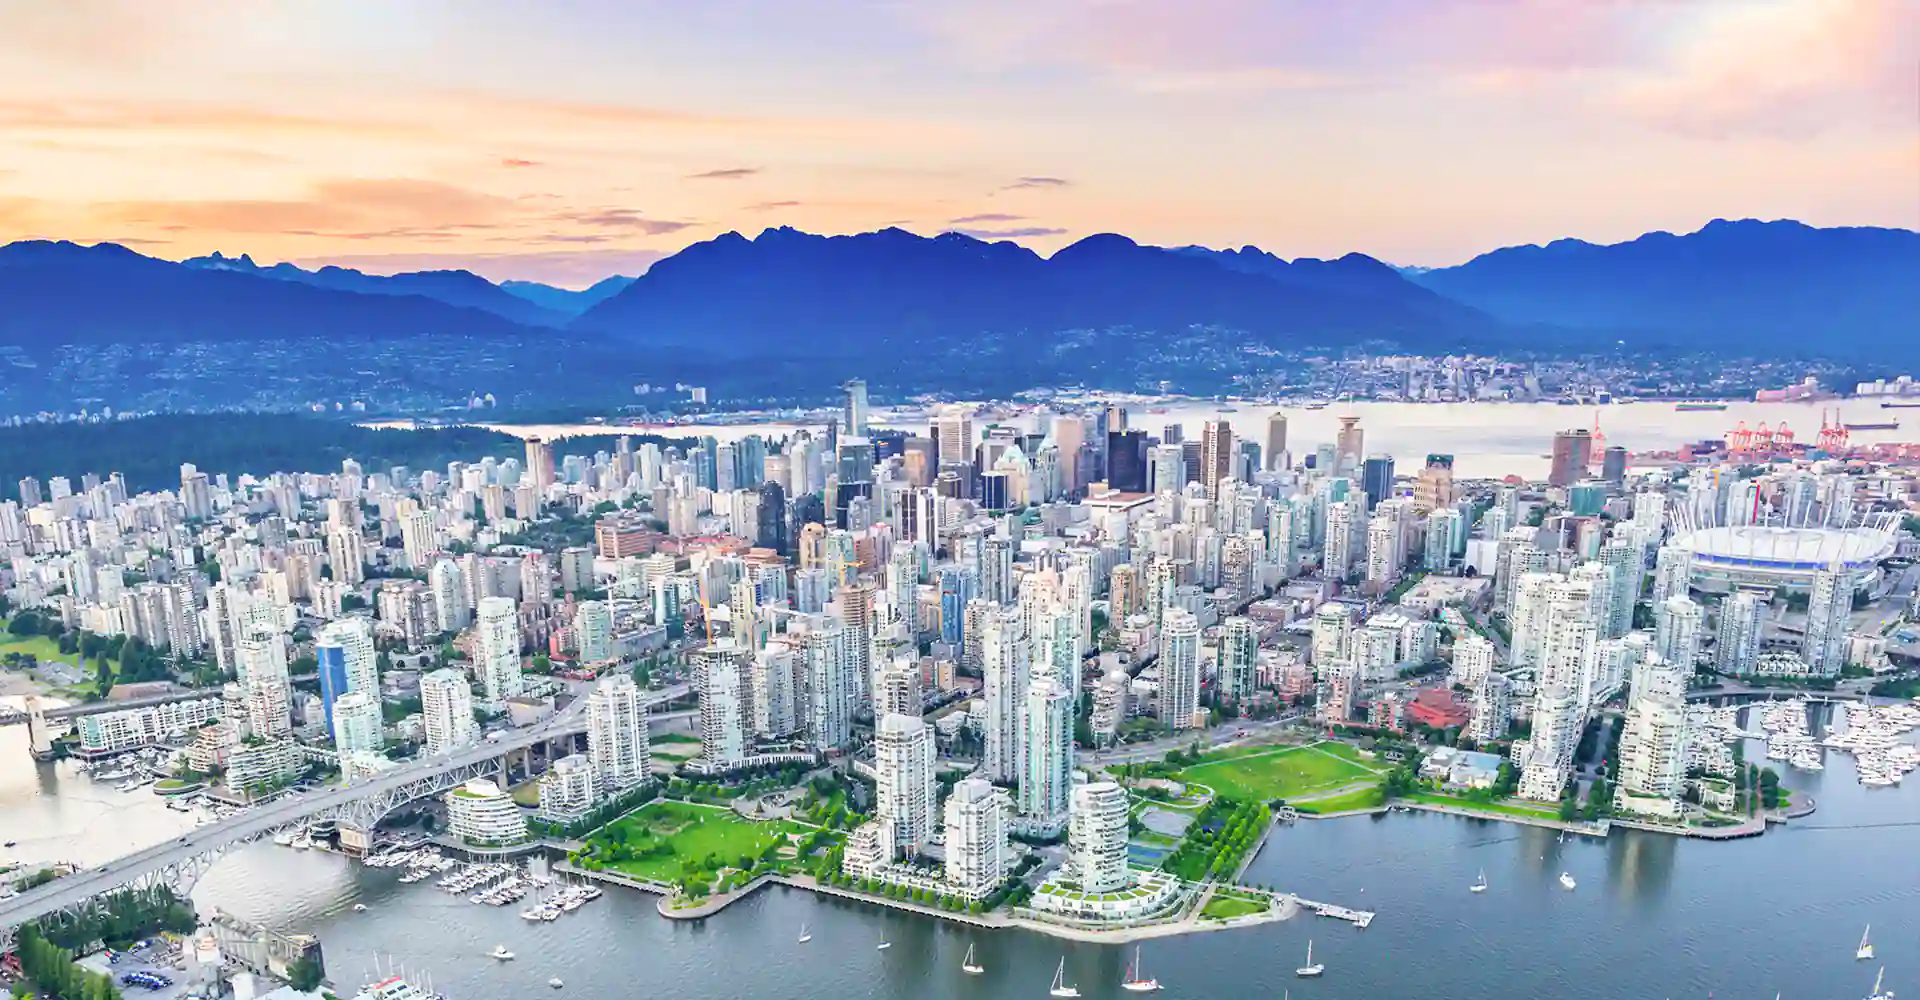  10 fun things to do around Vancouver this summer